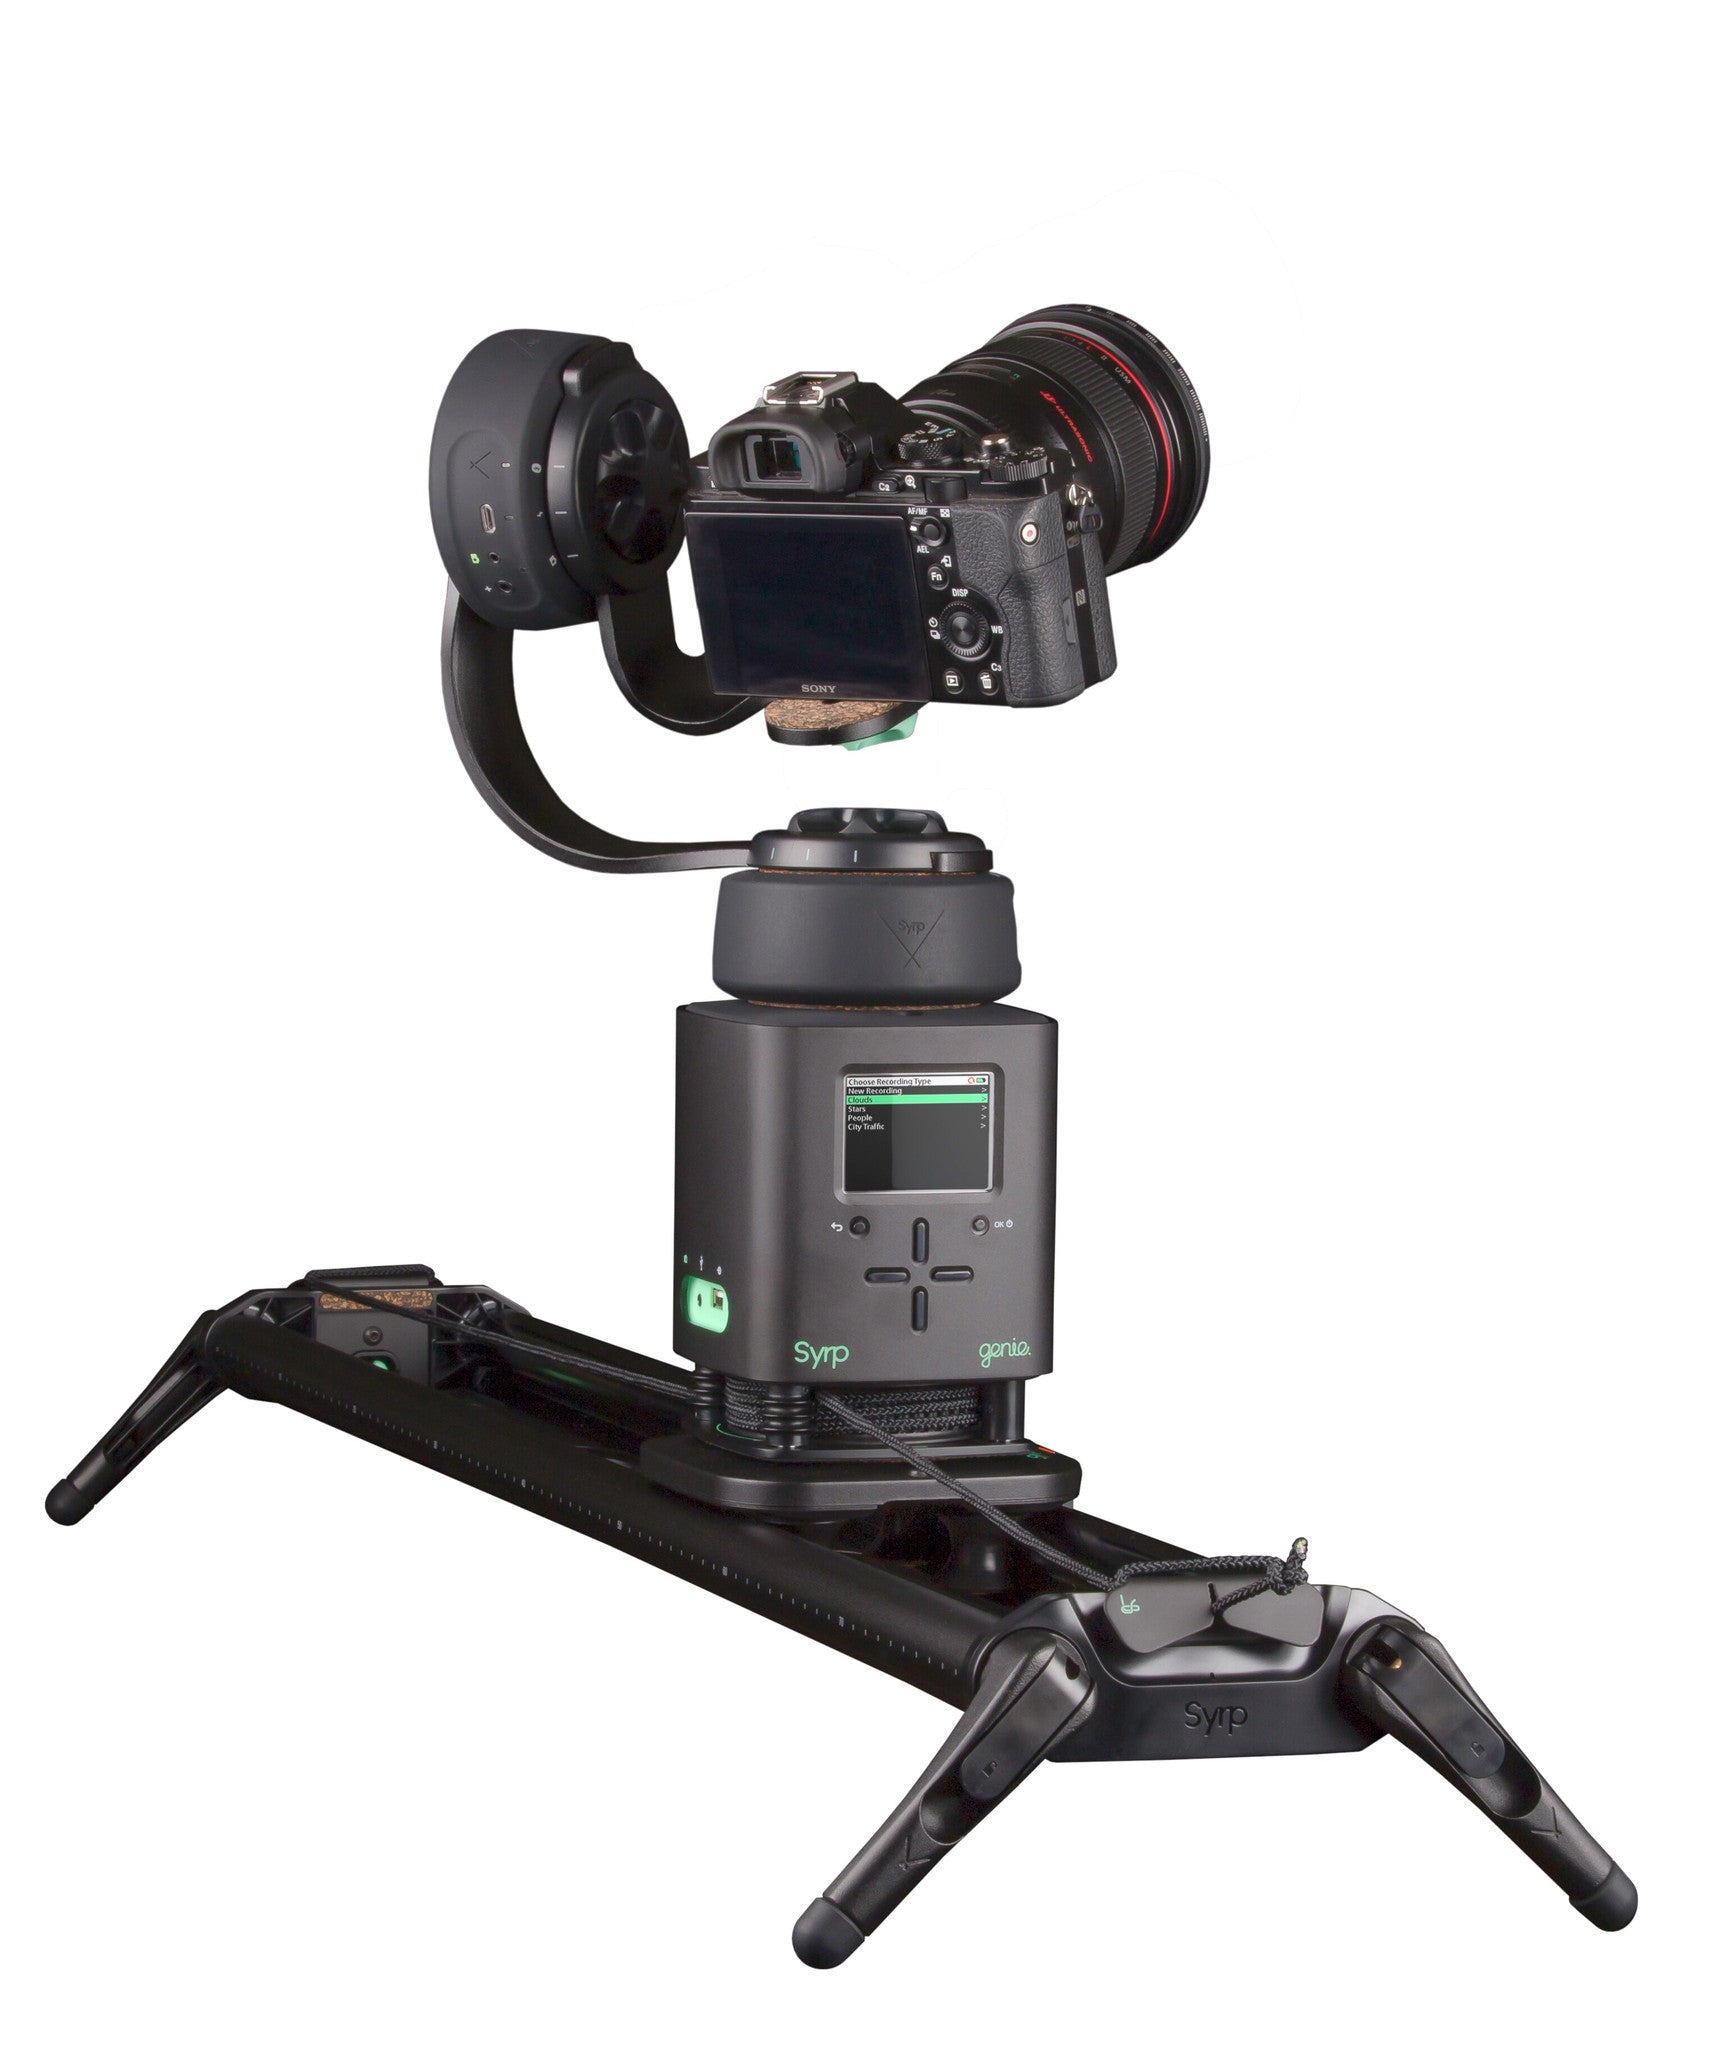 Syrp Pan Tilt Bracket for Genie and Genie Mini, video dollies & rigs, Syrp - Pictureline  - 2